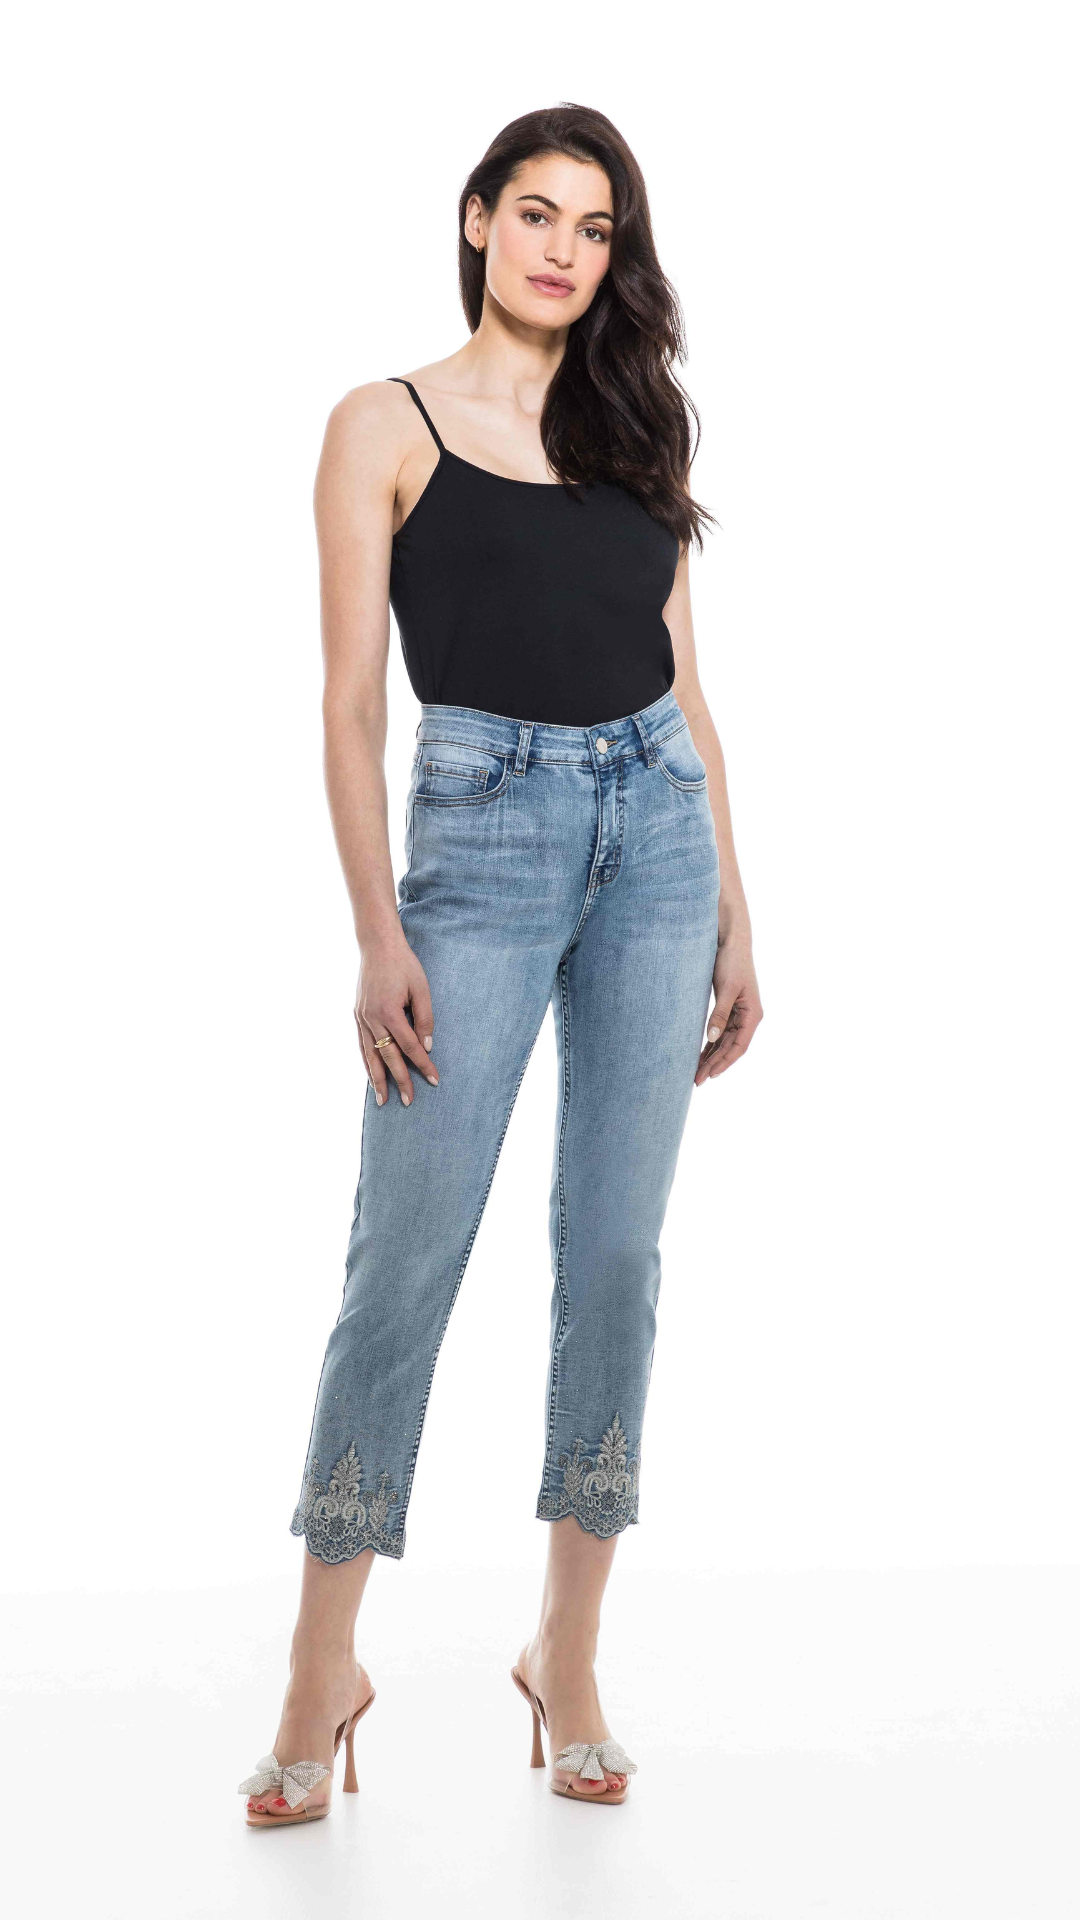 Woman wearing fashionable, Orly embellished cropped denim jeans with detailed hem and high heels standing against a white background.